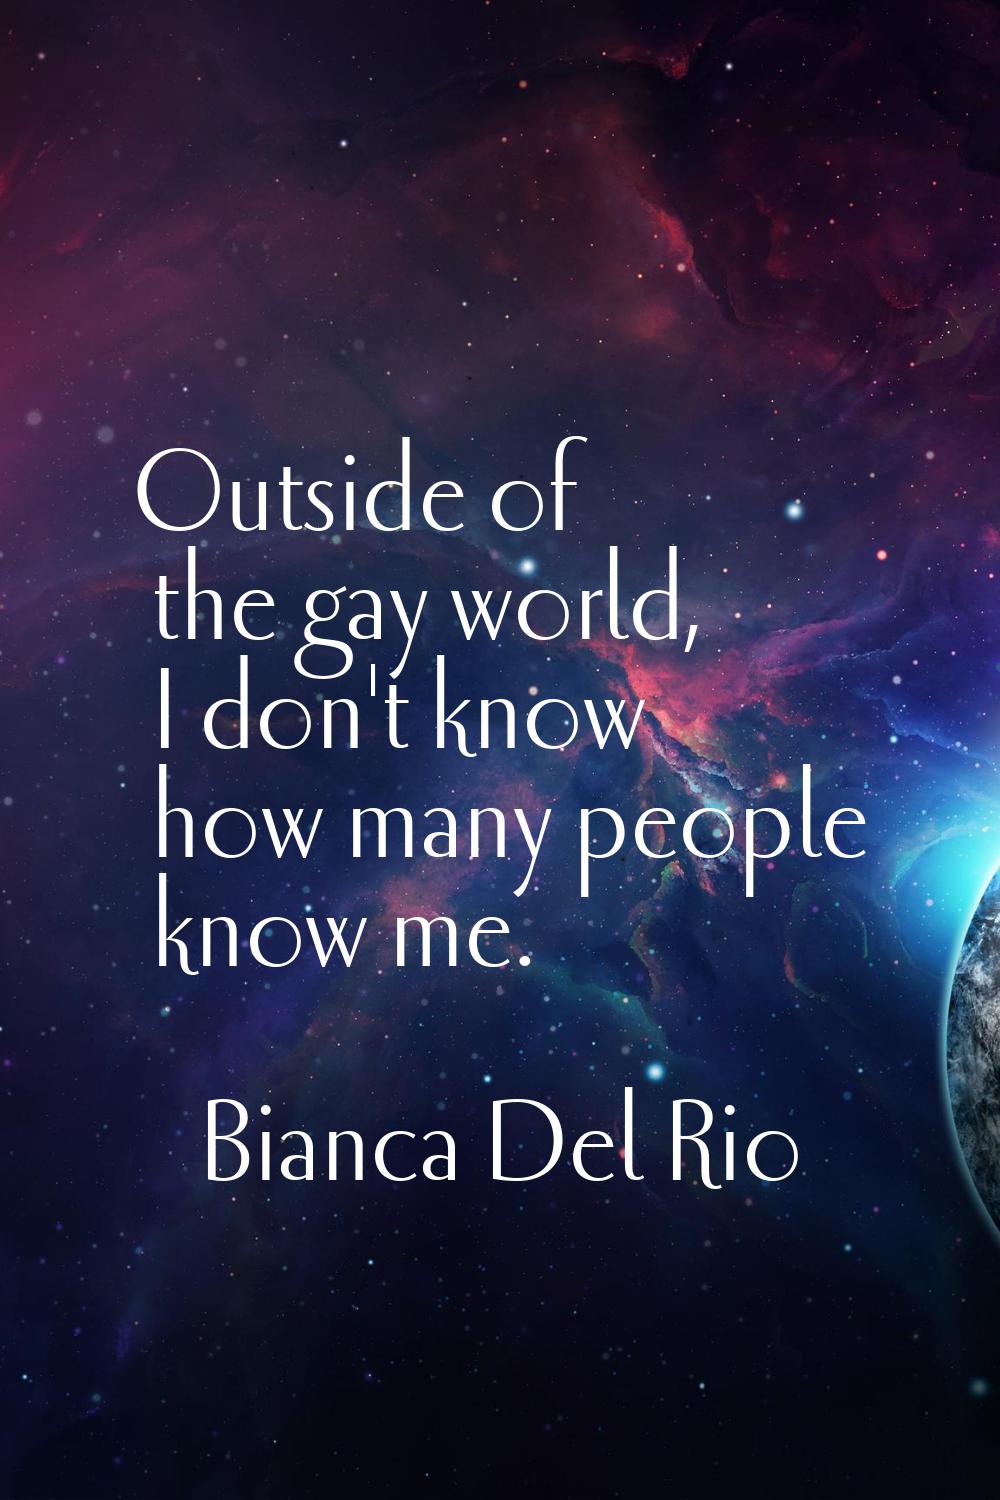 Outside of the gay world, I don't know how many people know me.